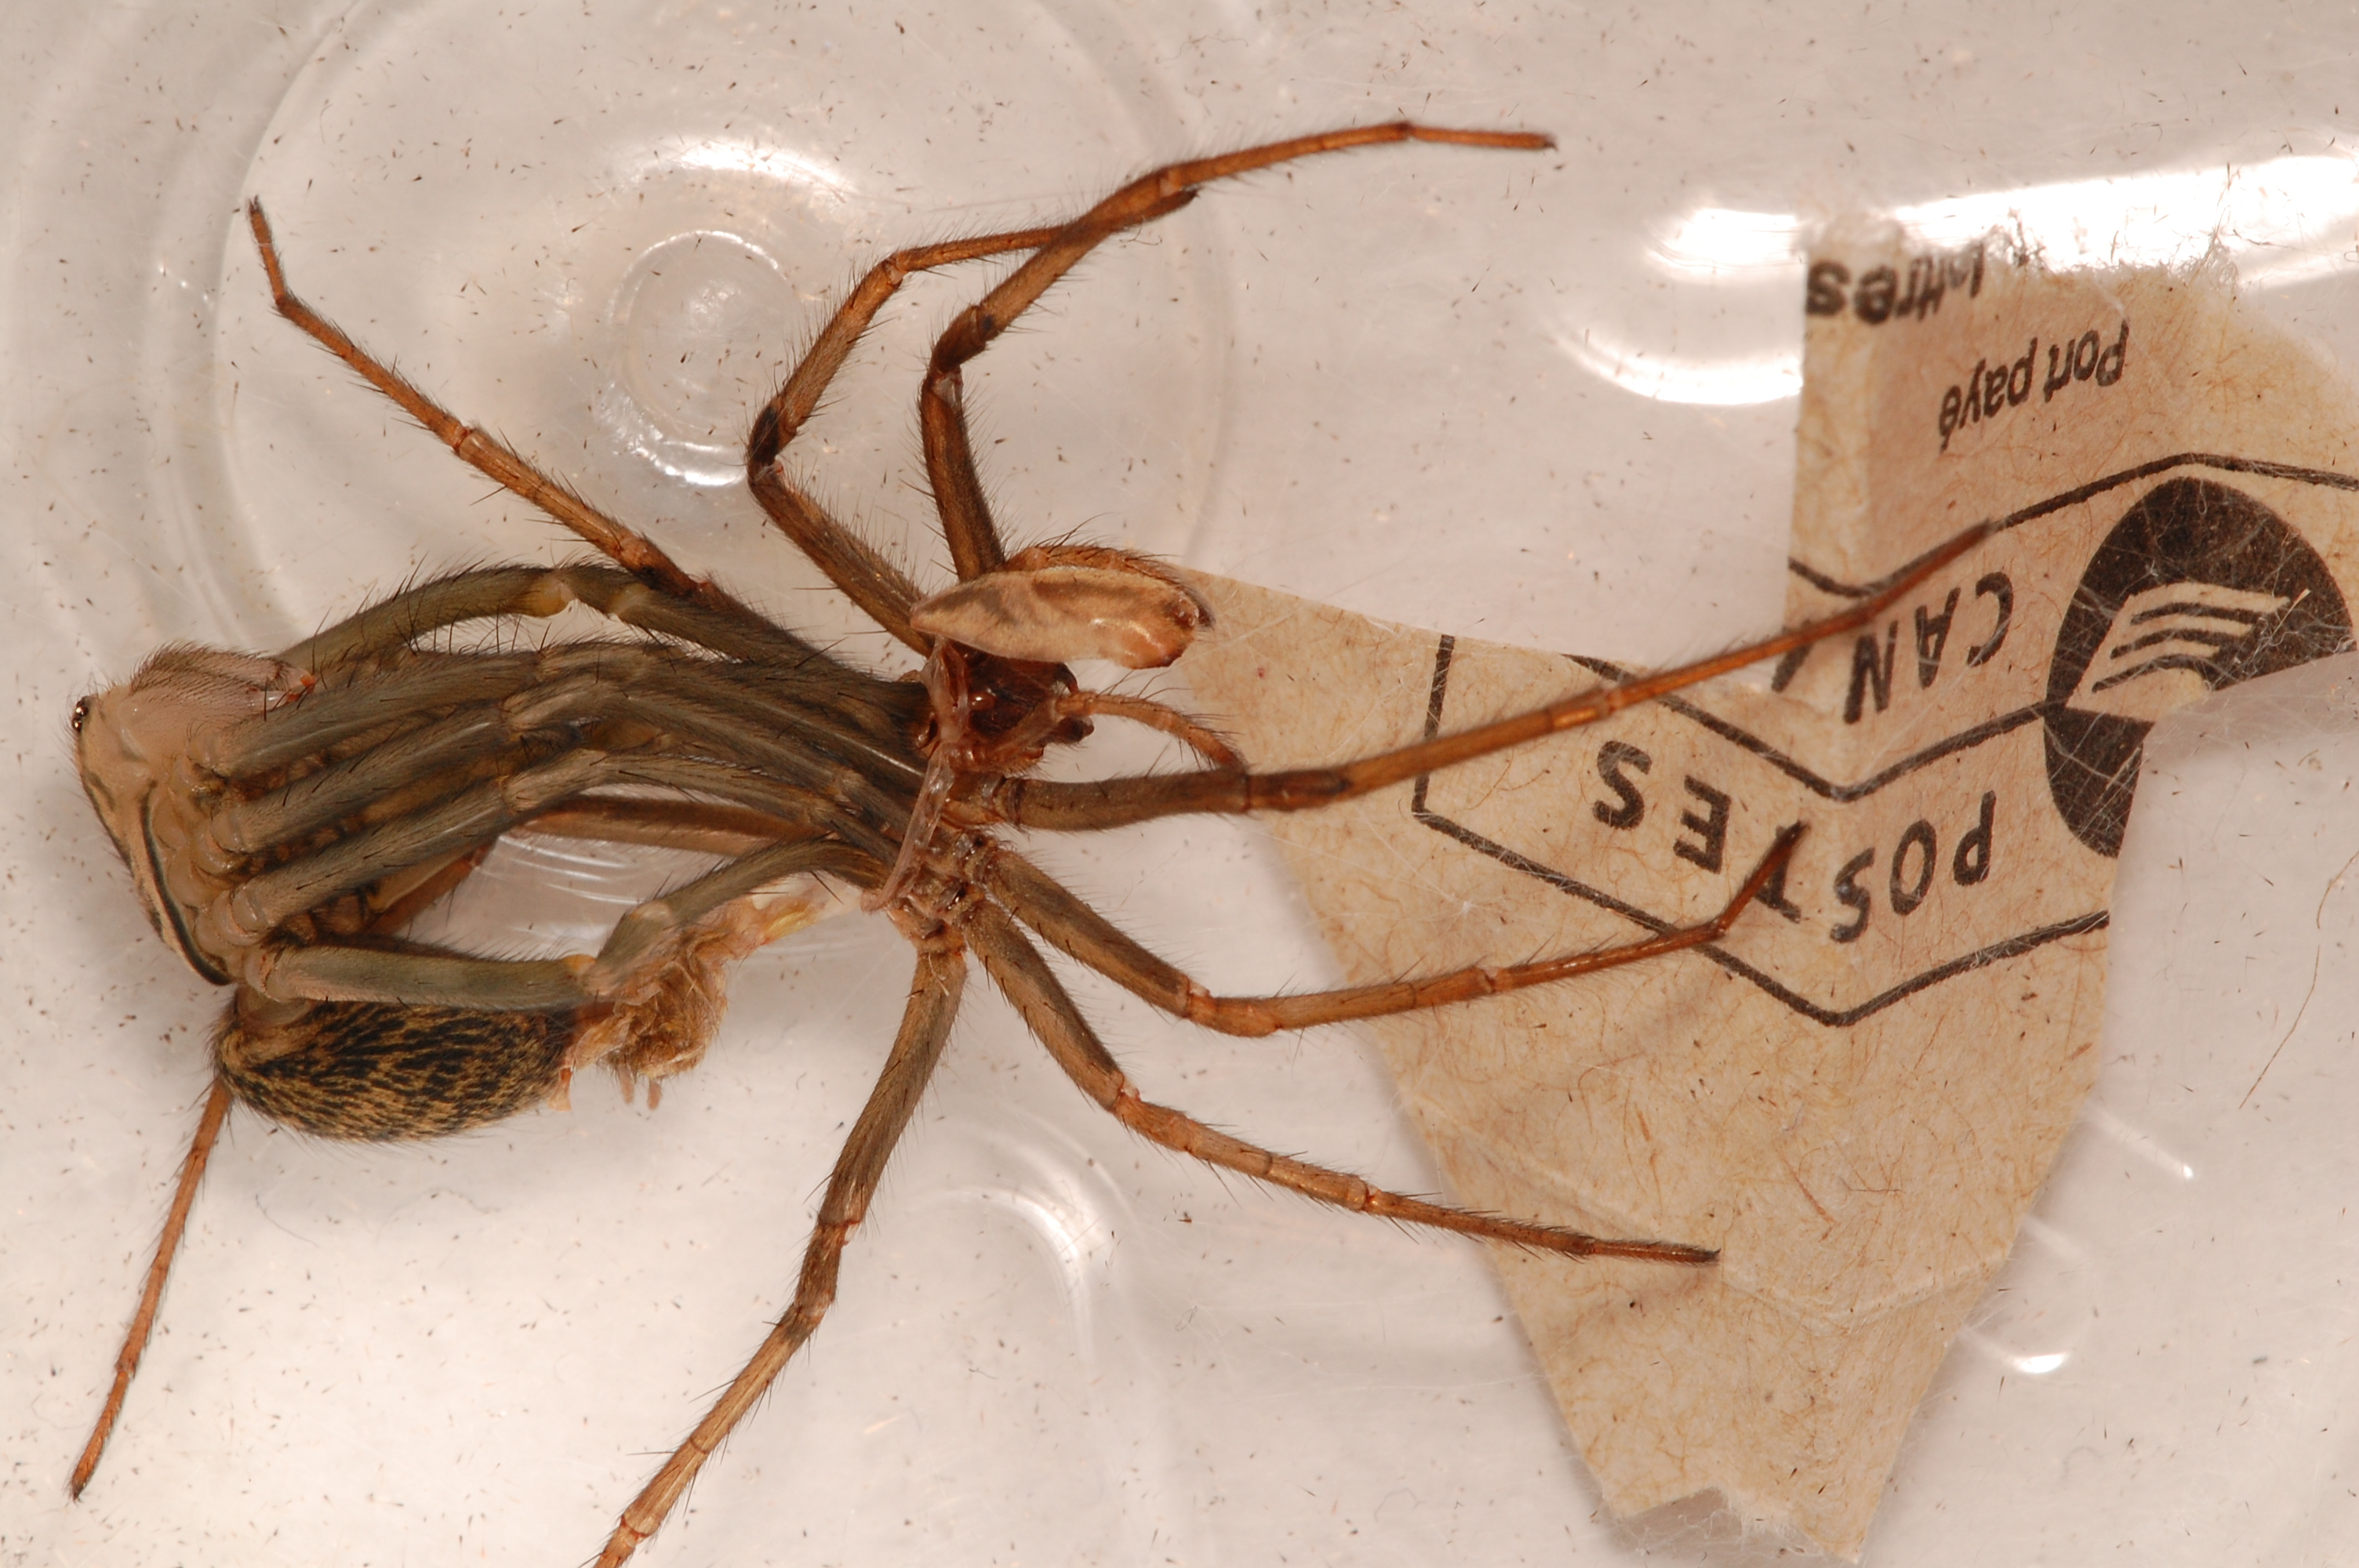 Giant house spider - Wikipedia